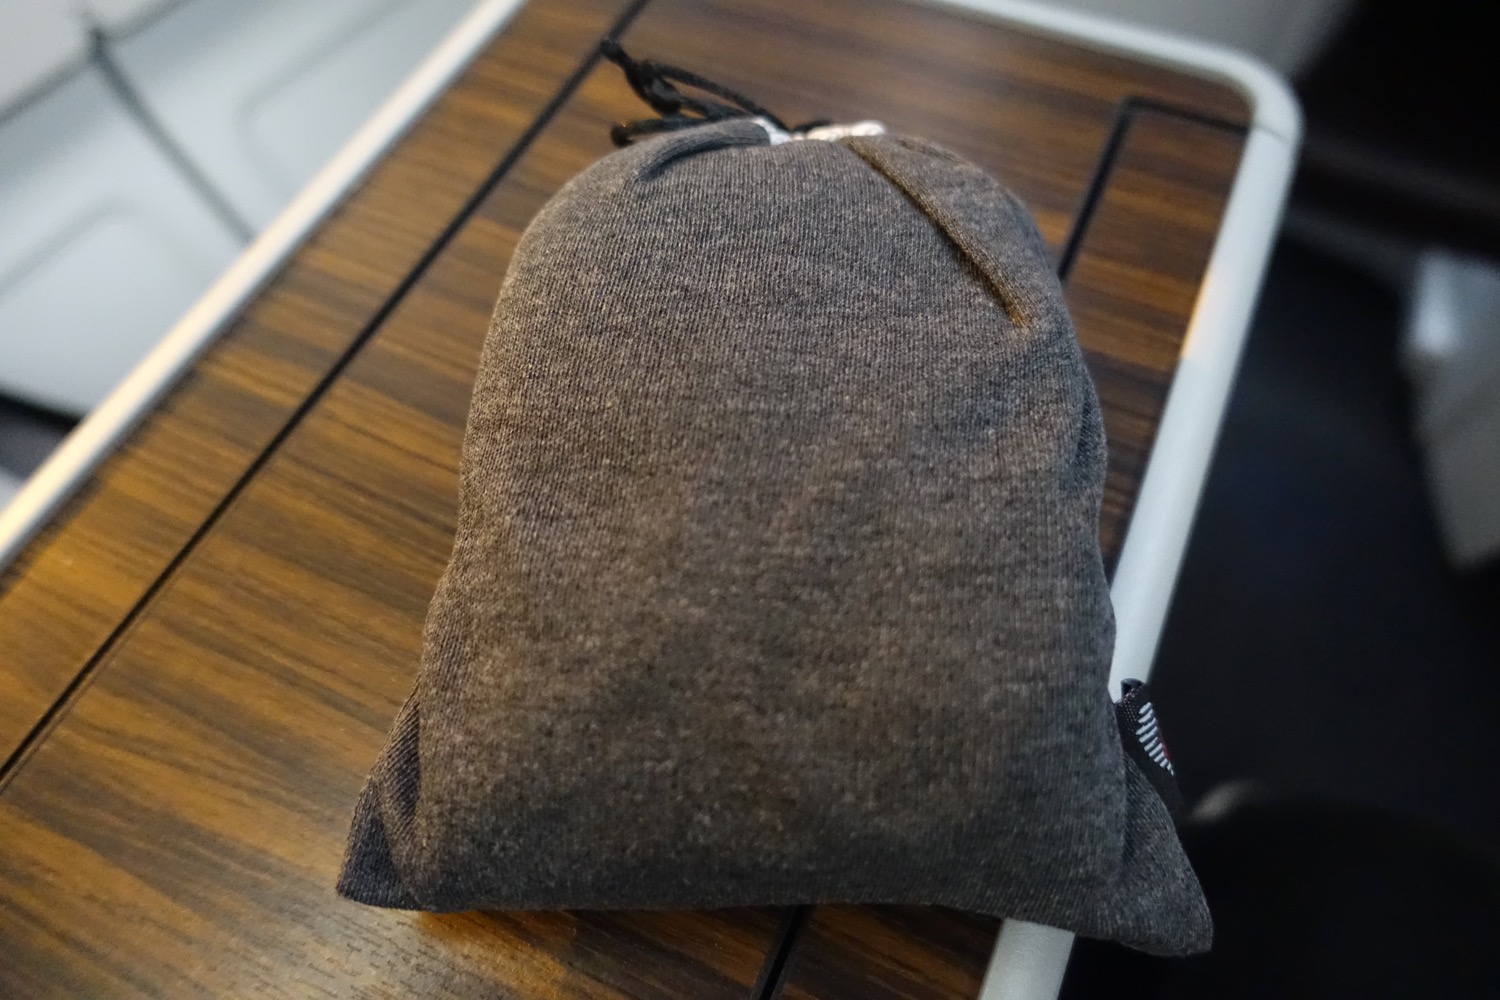 a small grey bag on a wood surface